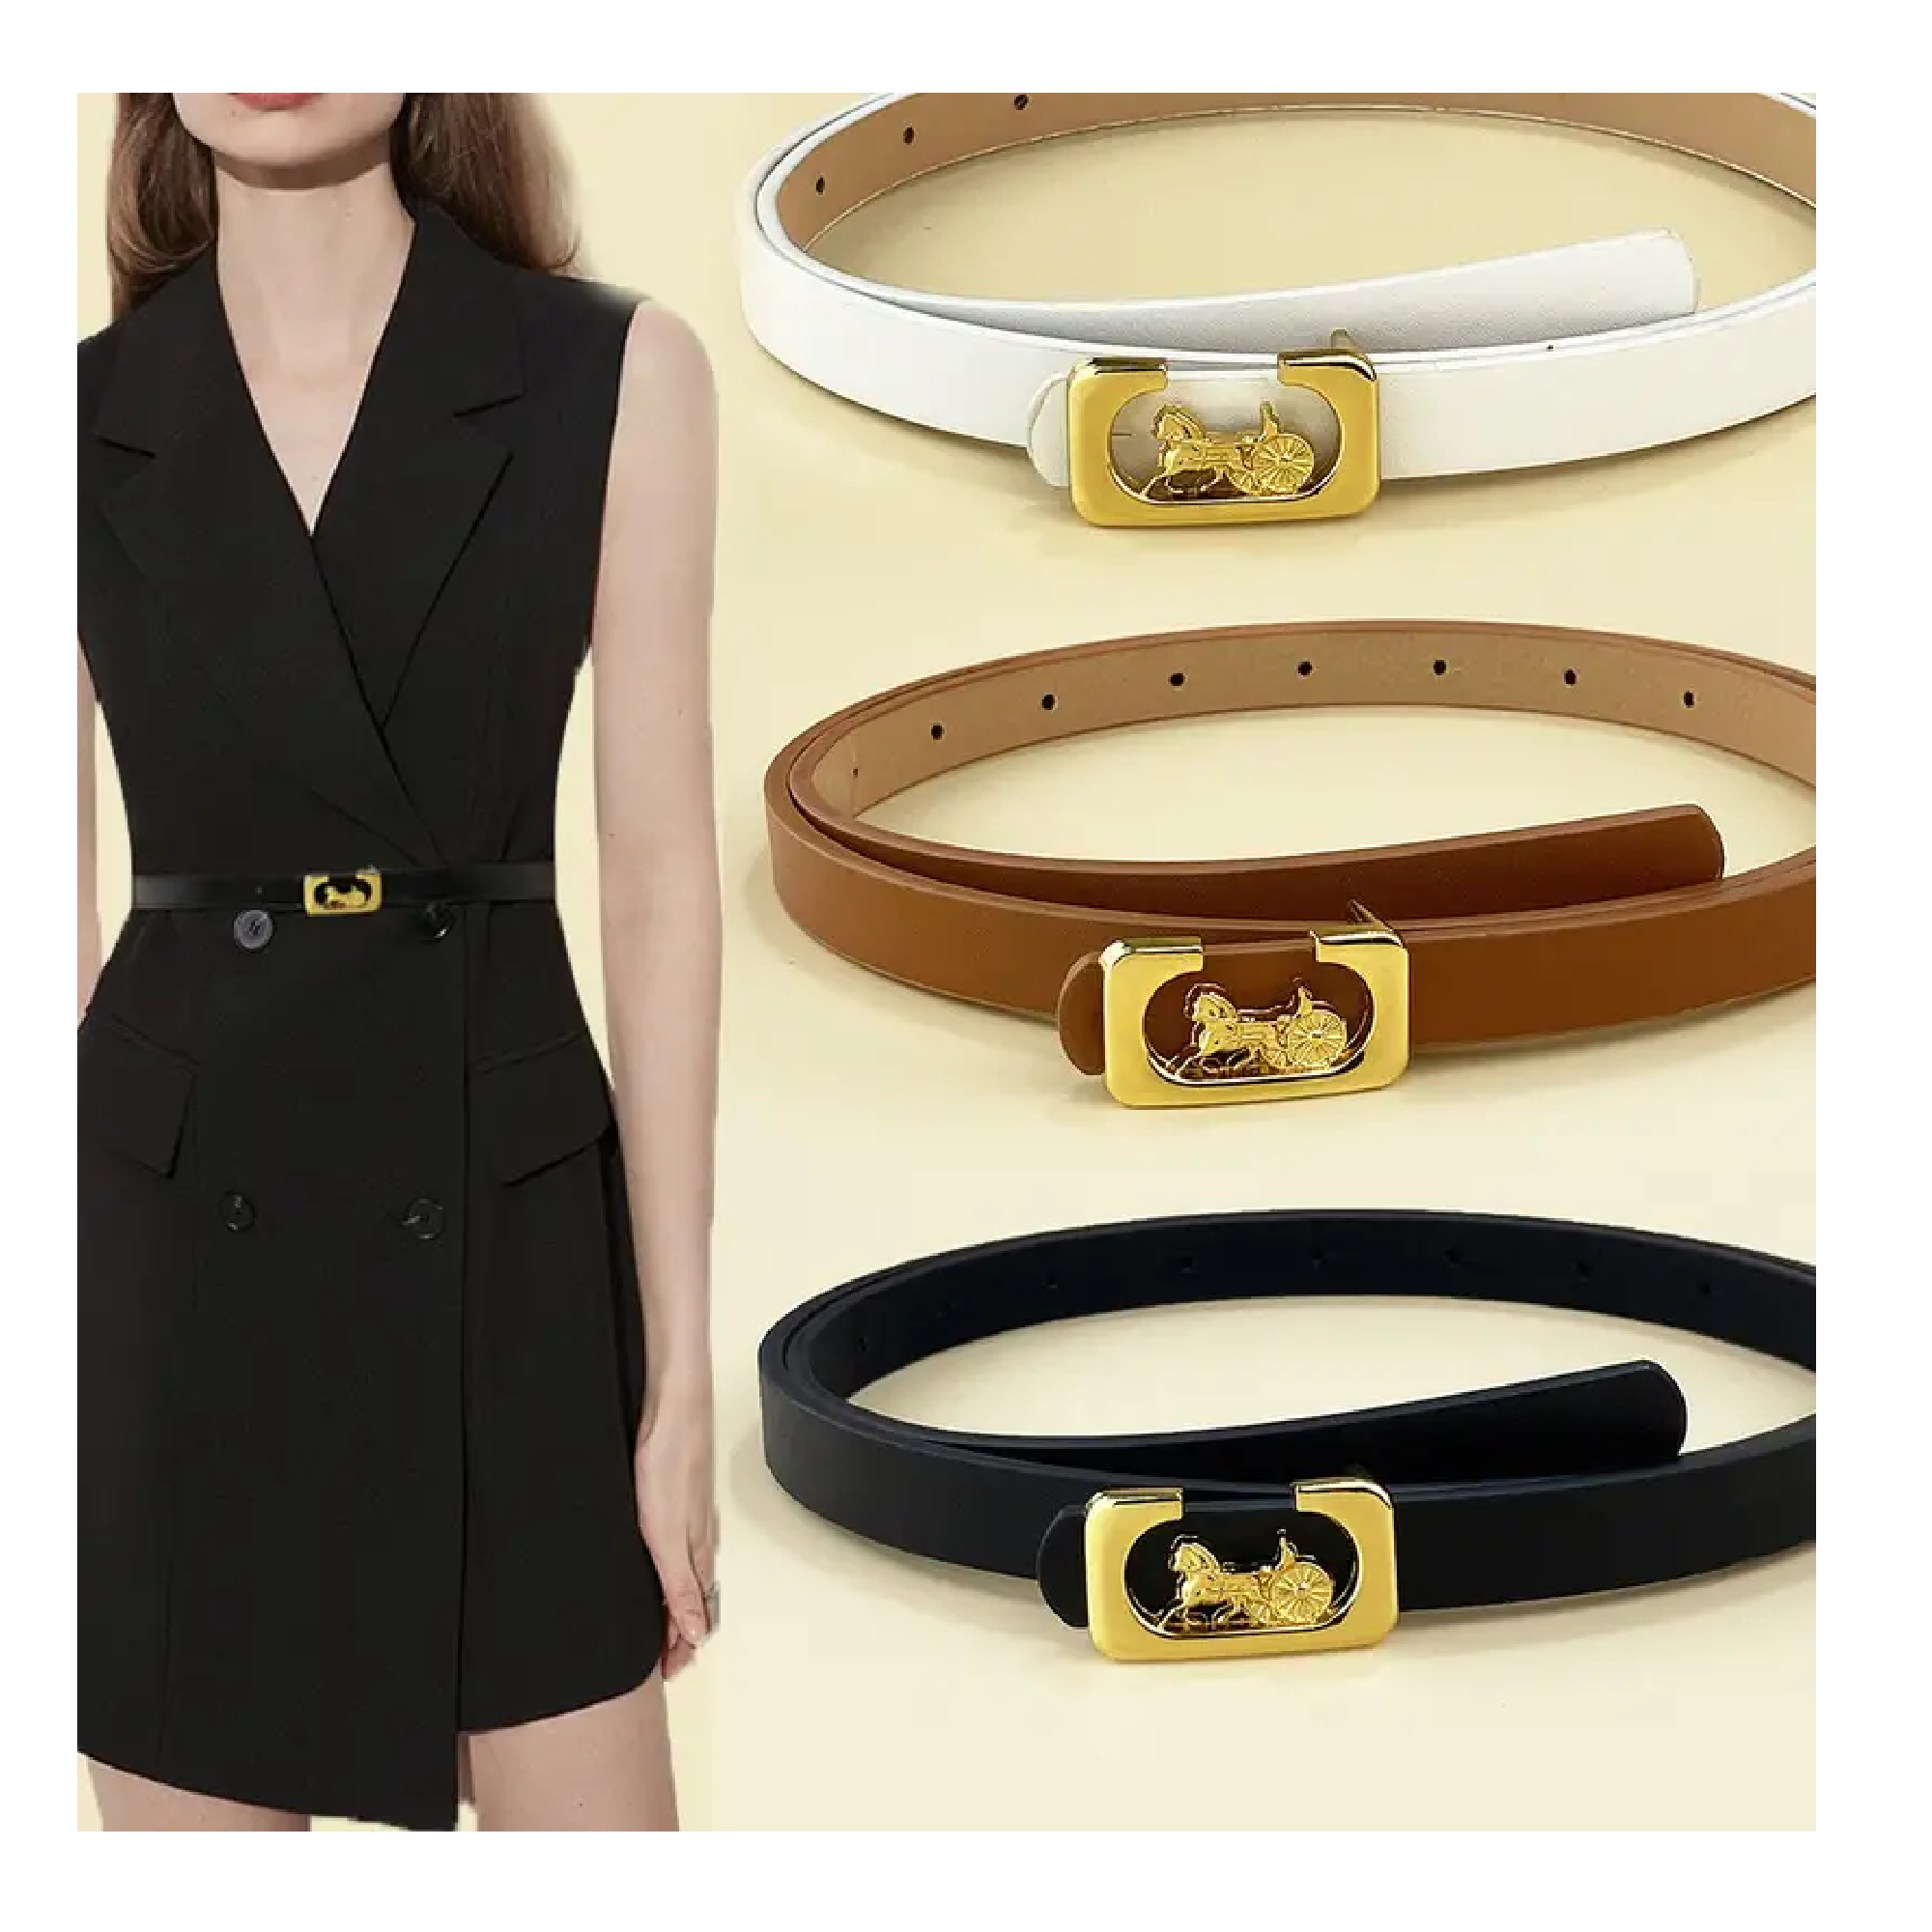 Trendy Golden Carriage Buckle Belts Classic Jeans Pants Waistband Vintage Solid Color PU Leather Belt For Women